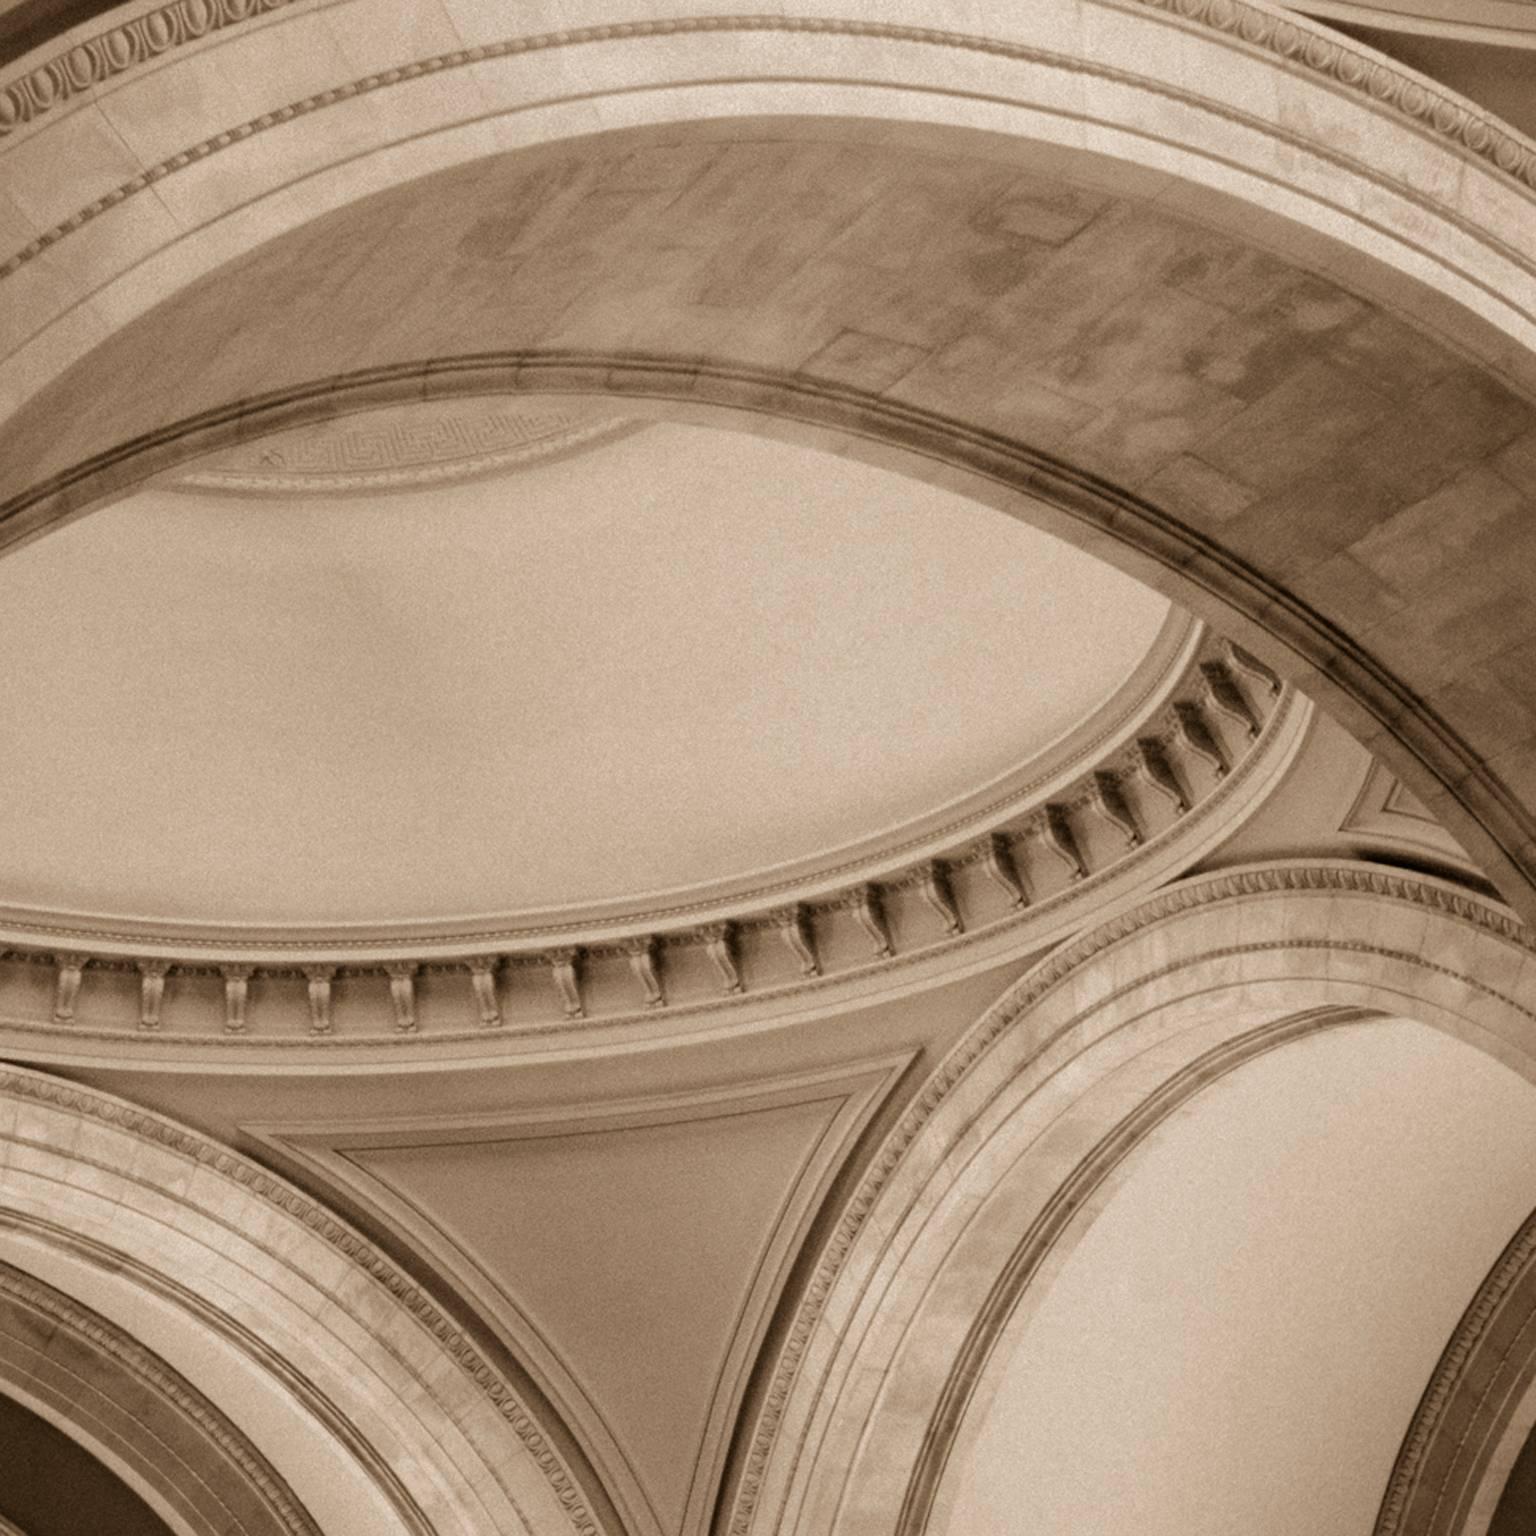 Massimo Di Lorenzo, “Arches, Metropolitan Museum of Art”, New York City, USA
Chromogenic C Print, 24” x 30”, No. 2 in an Edition of 15.
Signed, Dated and Numbered on the Reverse.

Shipping Price will be determined based on service required and